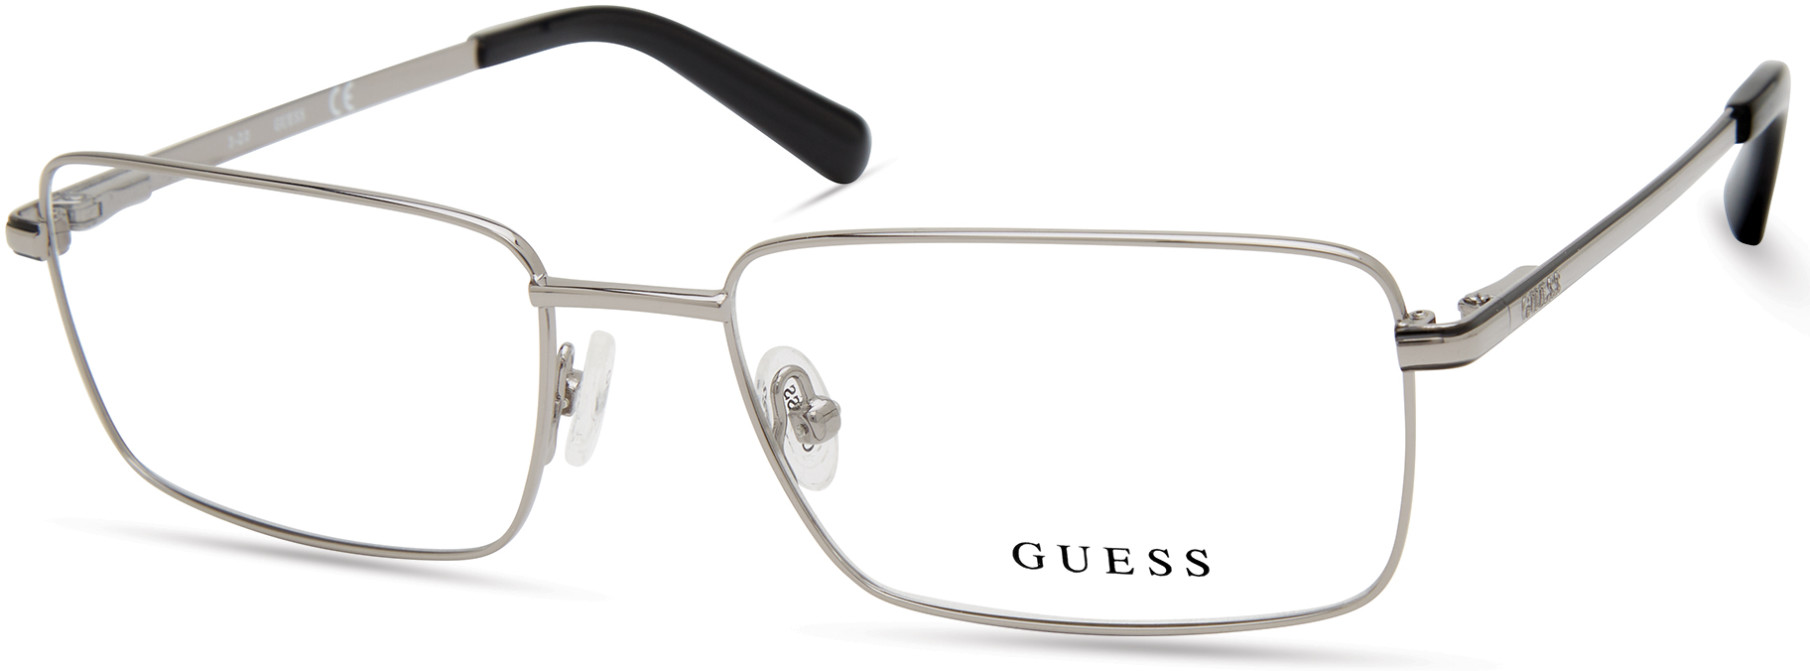 GUESS 50042 010